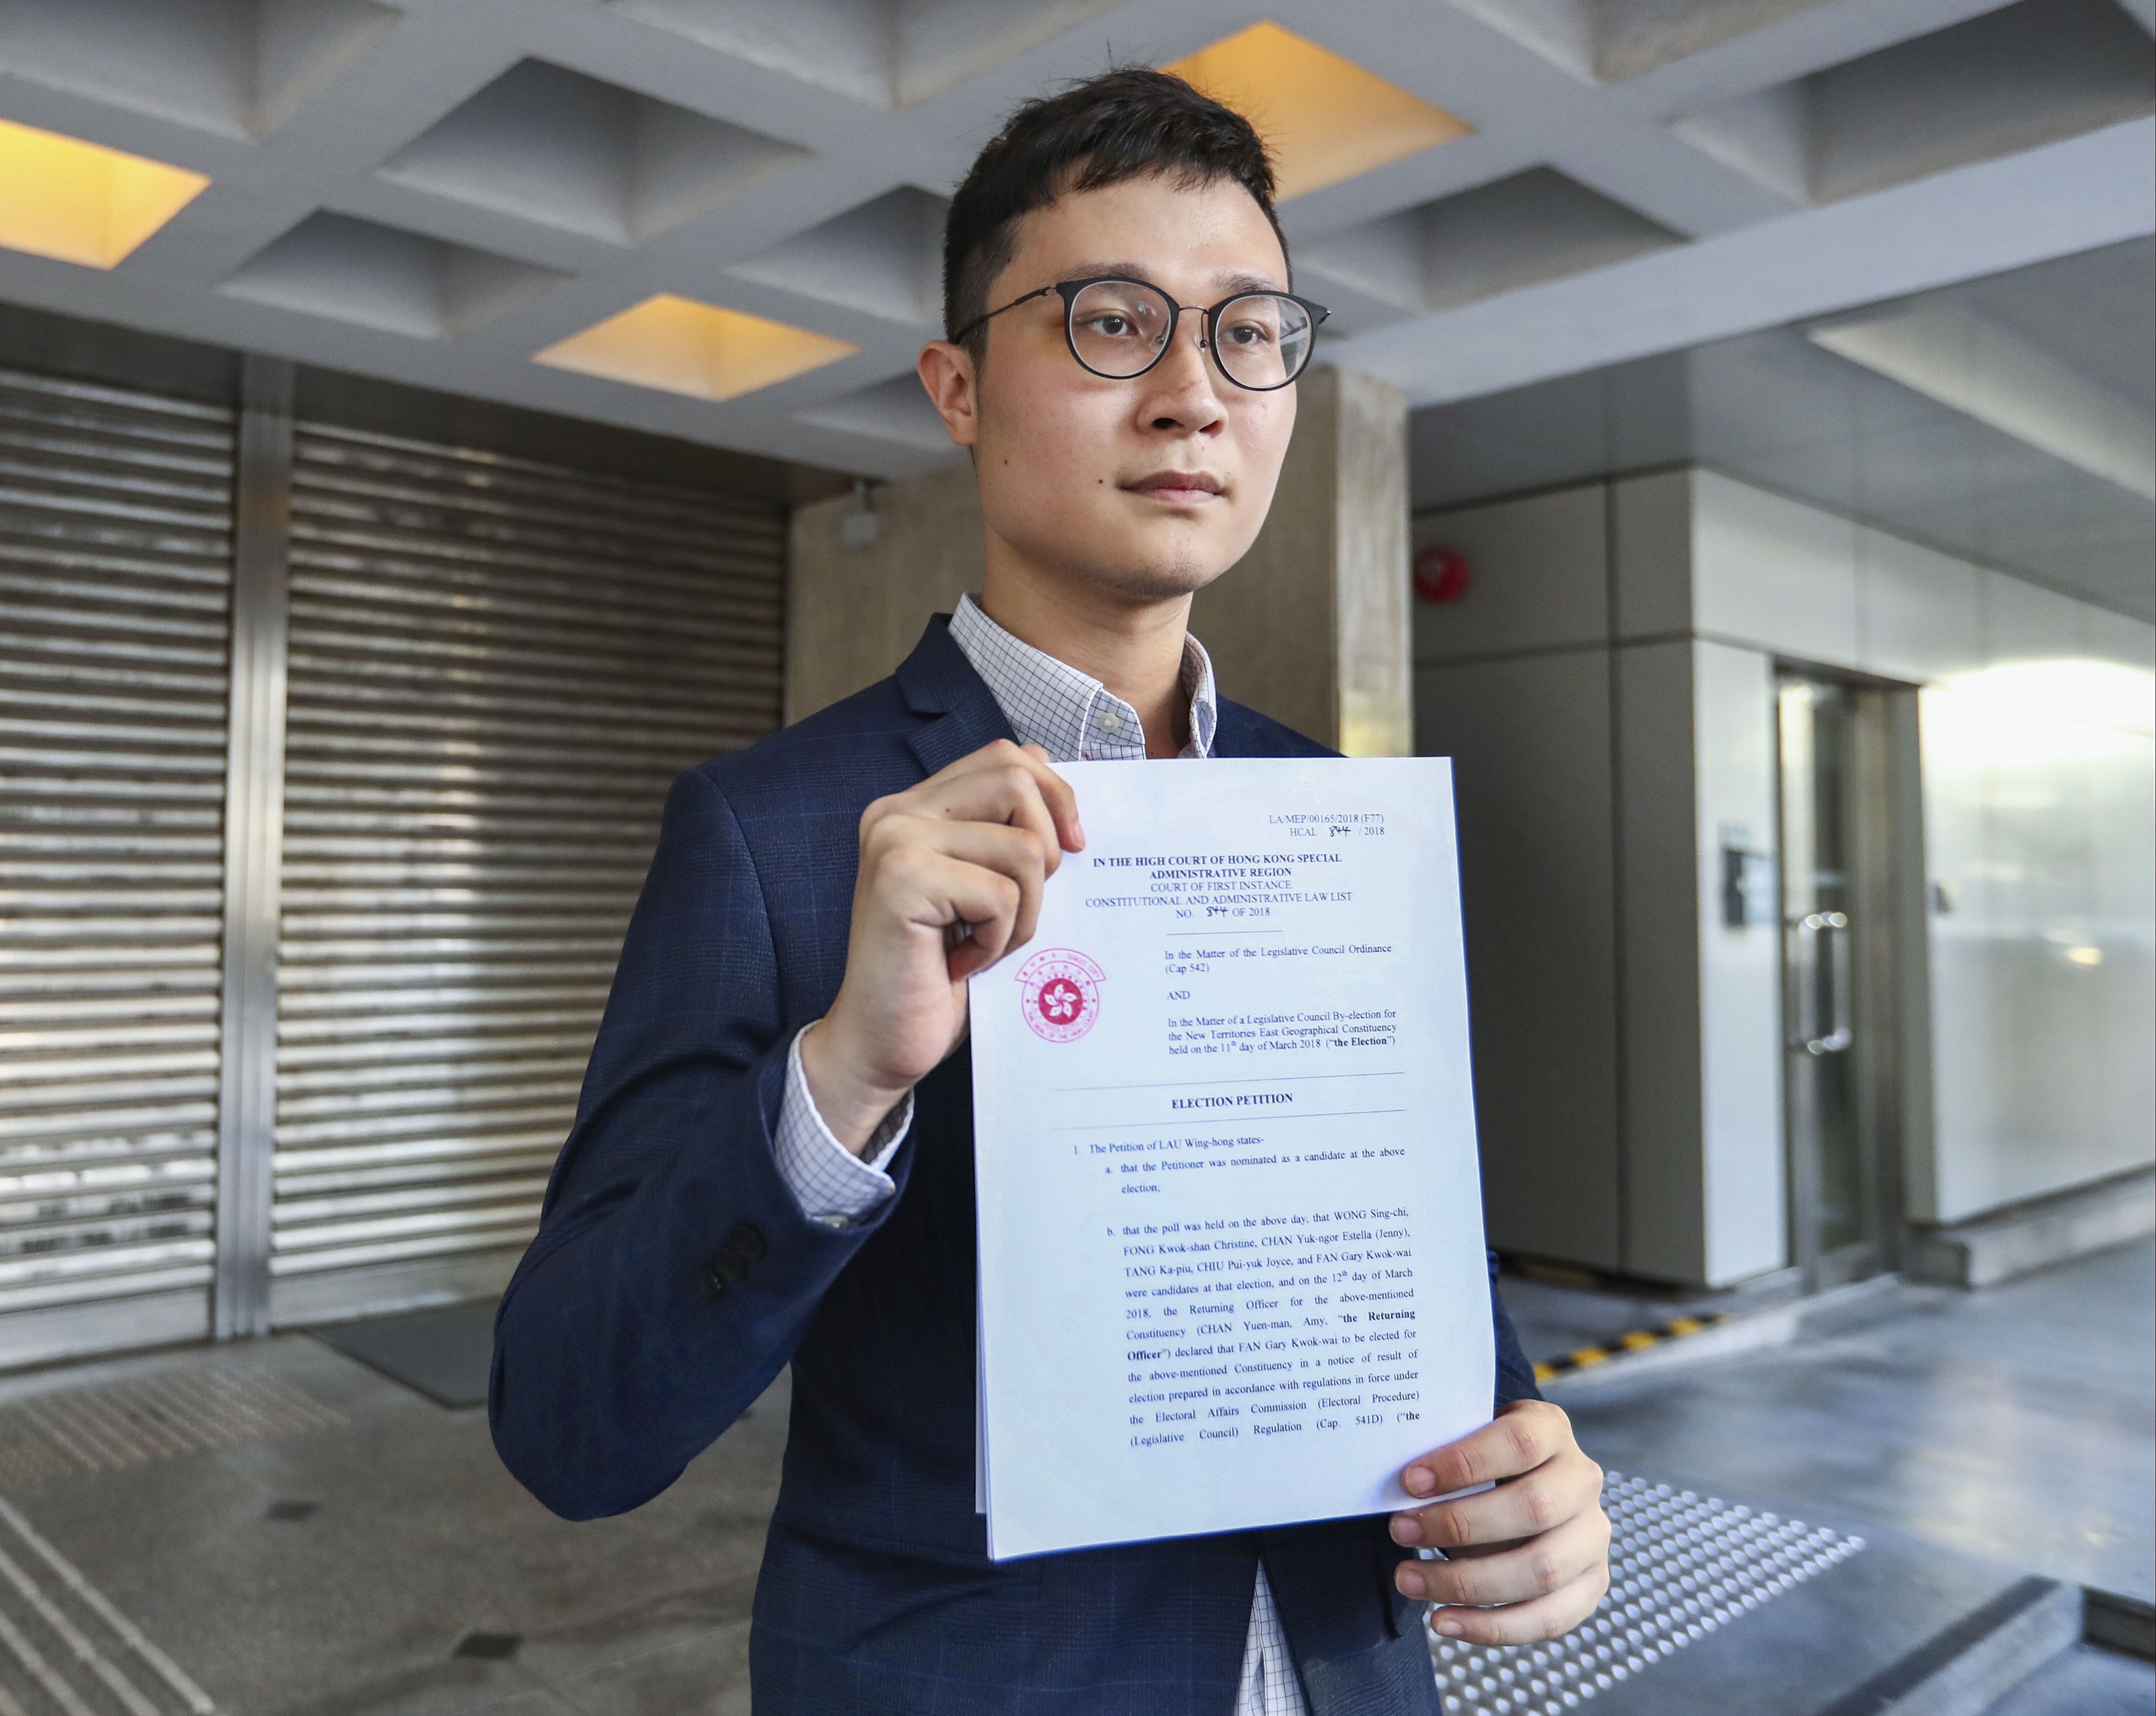 Ventus Lau said in a statement his successful petition was “definitely not a victory”. Photo: Nora Tam